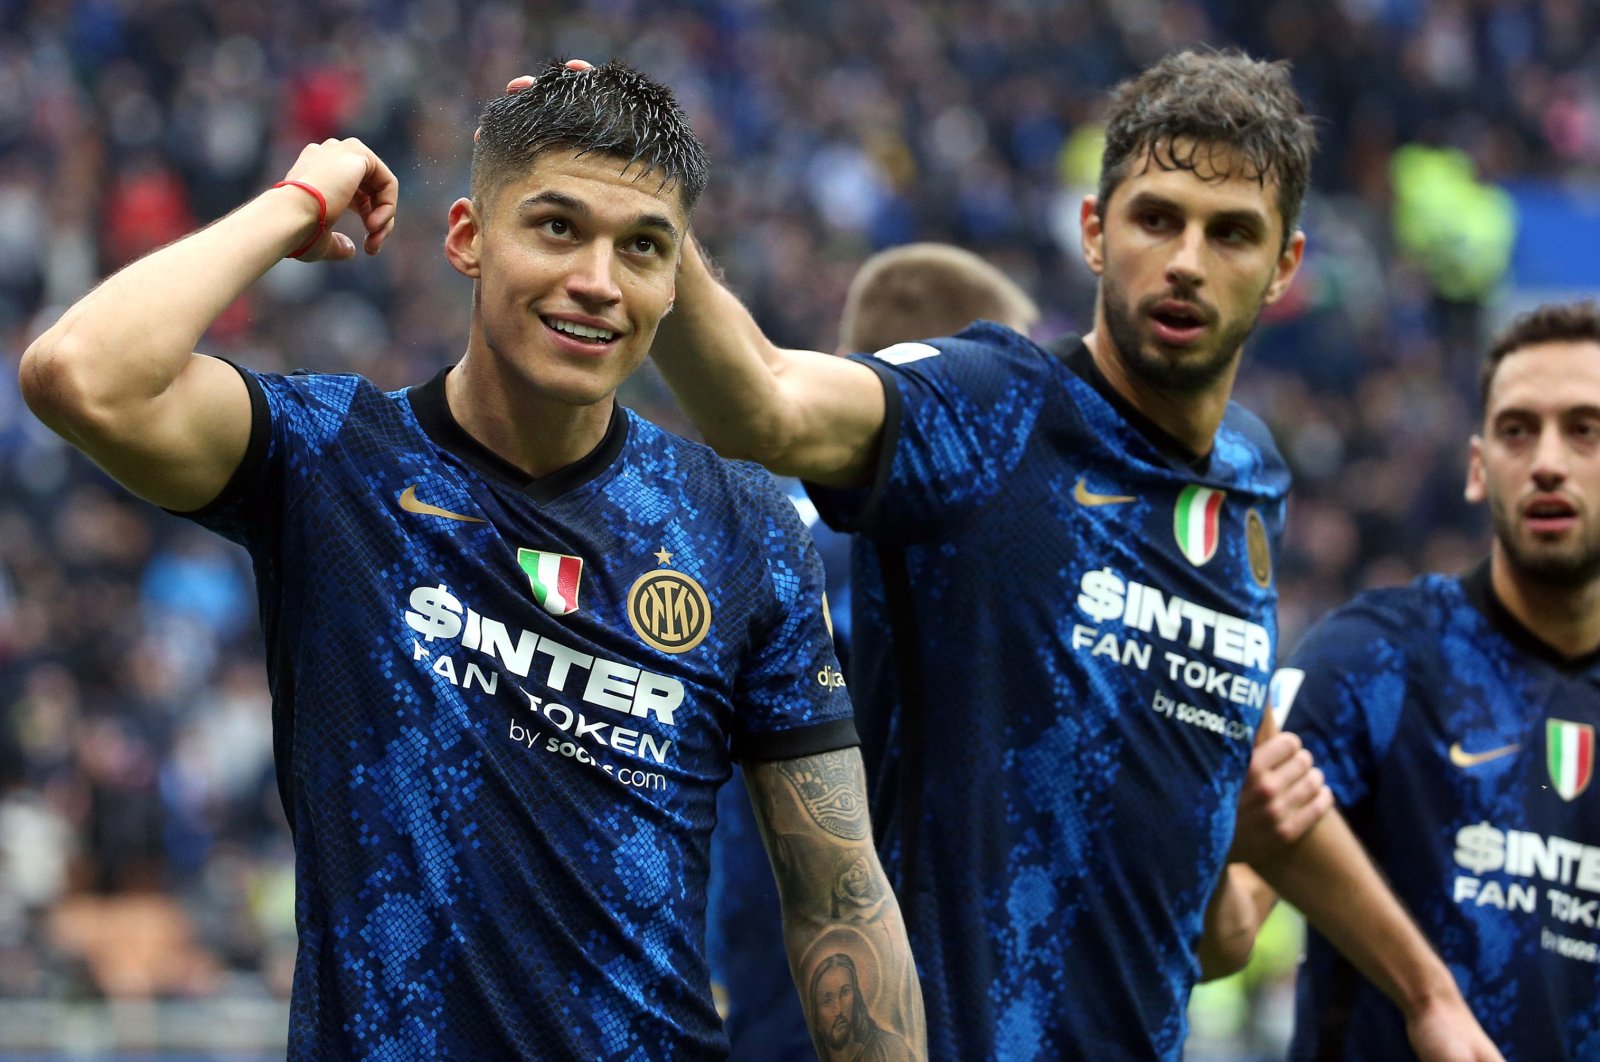 Inter Milan's Joaquin Correa (L) celebrates with his teammates after scoring during a Serie A soccer match against Udinese at Giuseppe Meazza stadium in Milan, Italy, Oct. 31, 2021. (EPA Photo)